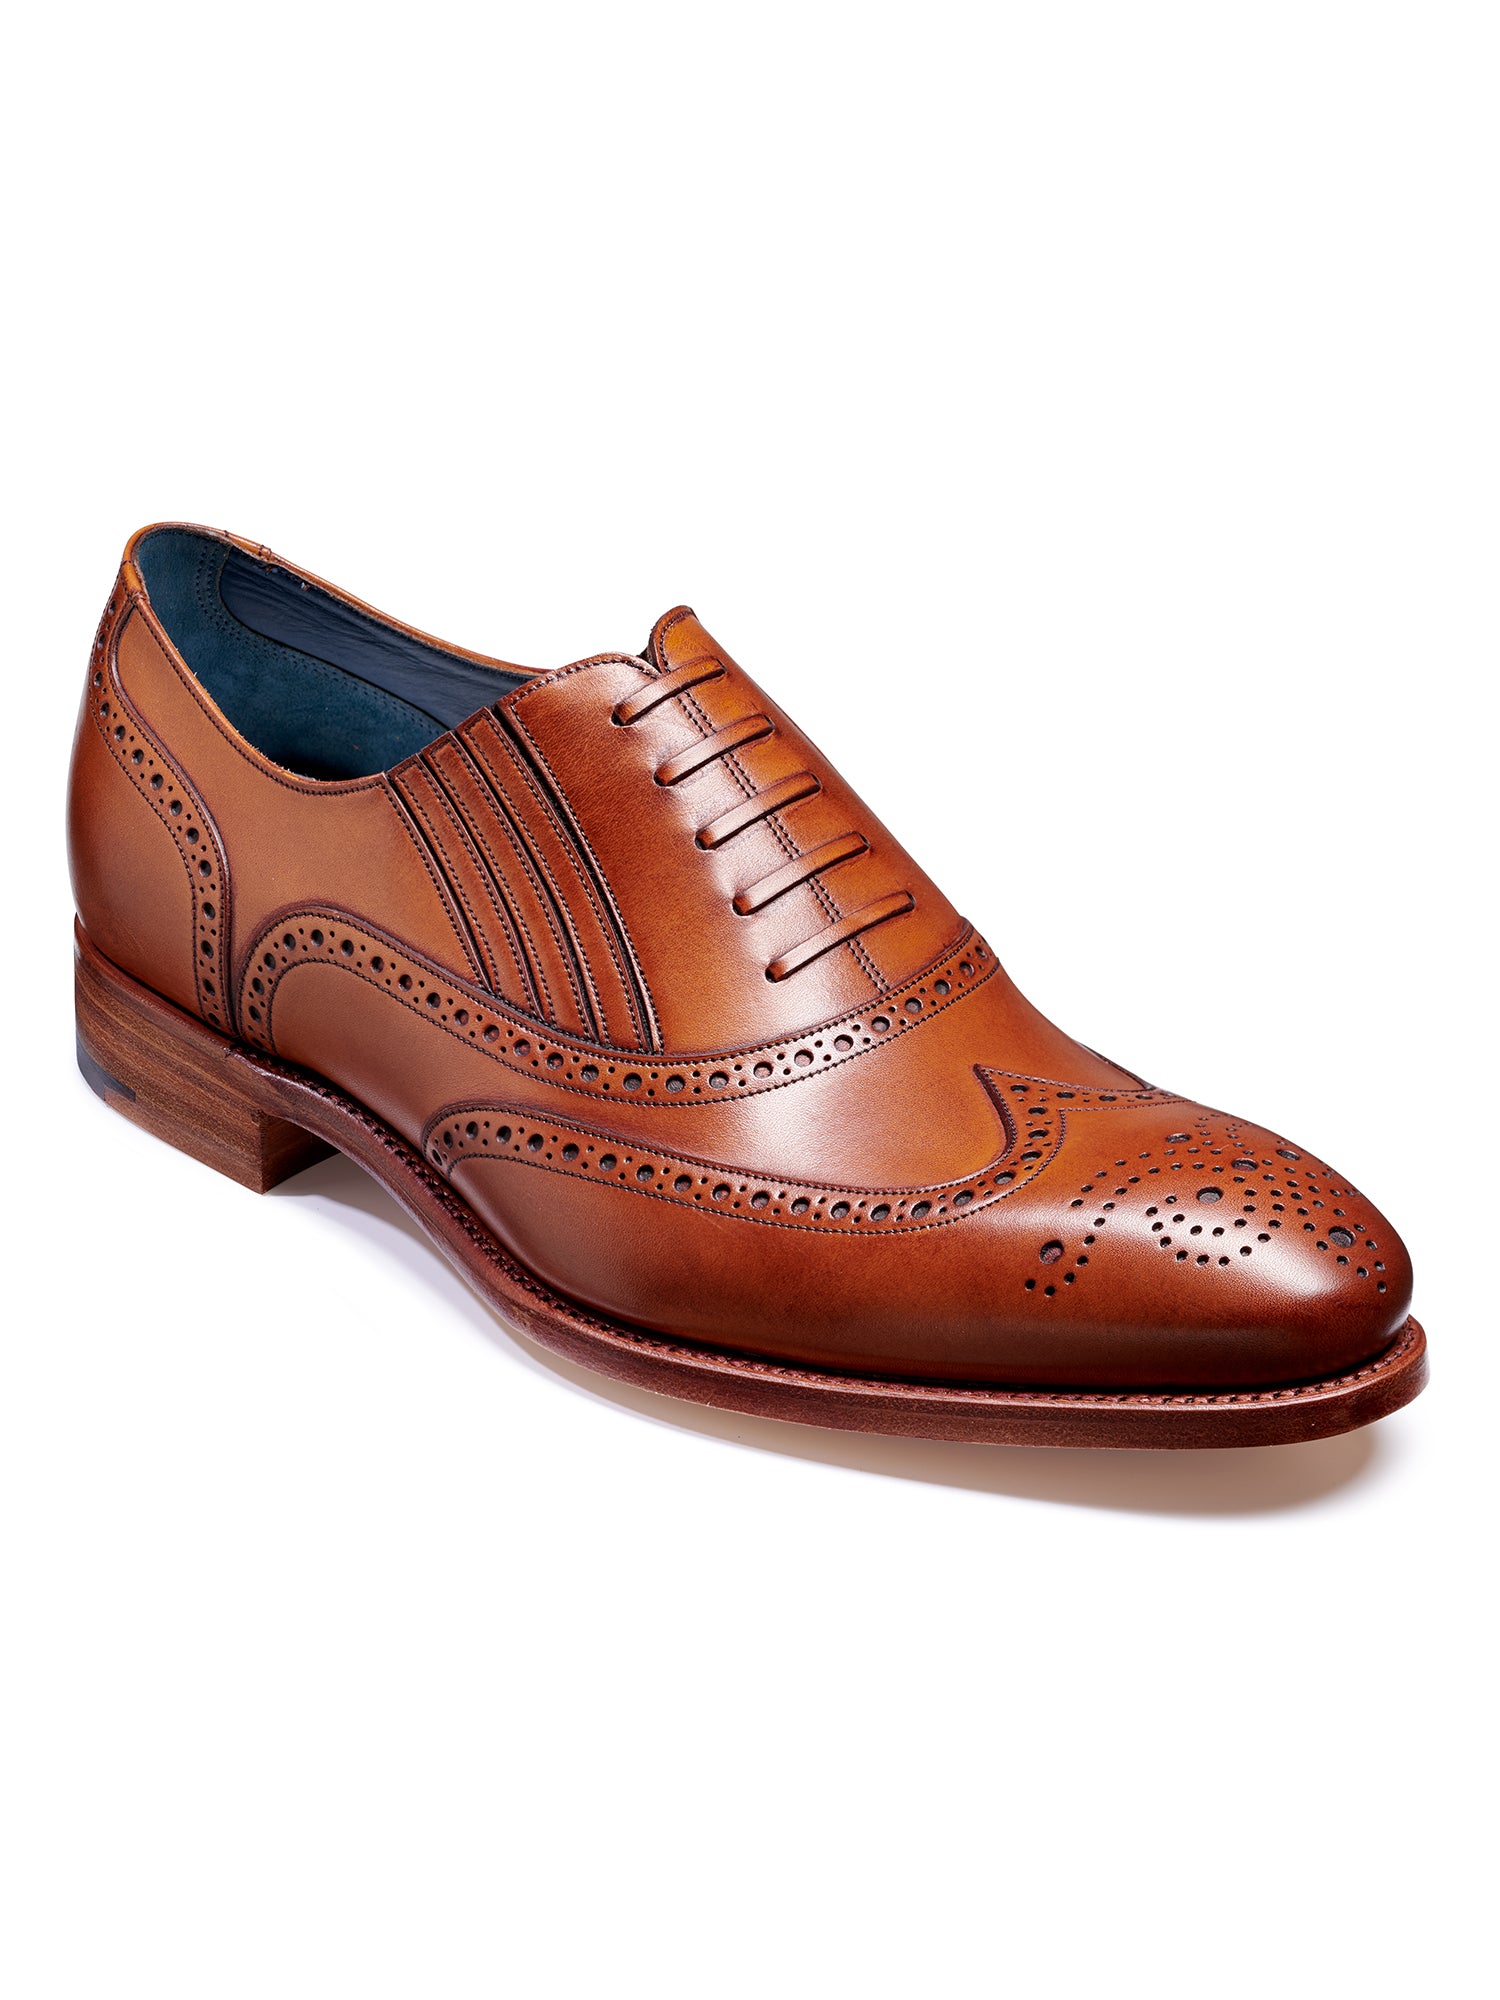 Barker Shoes | Sale | Brogues | Timothy 